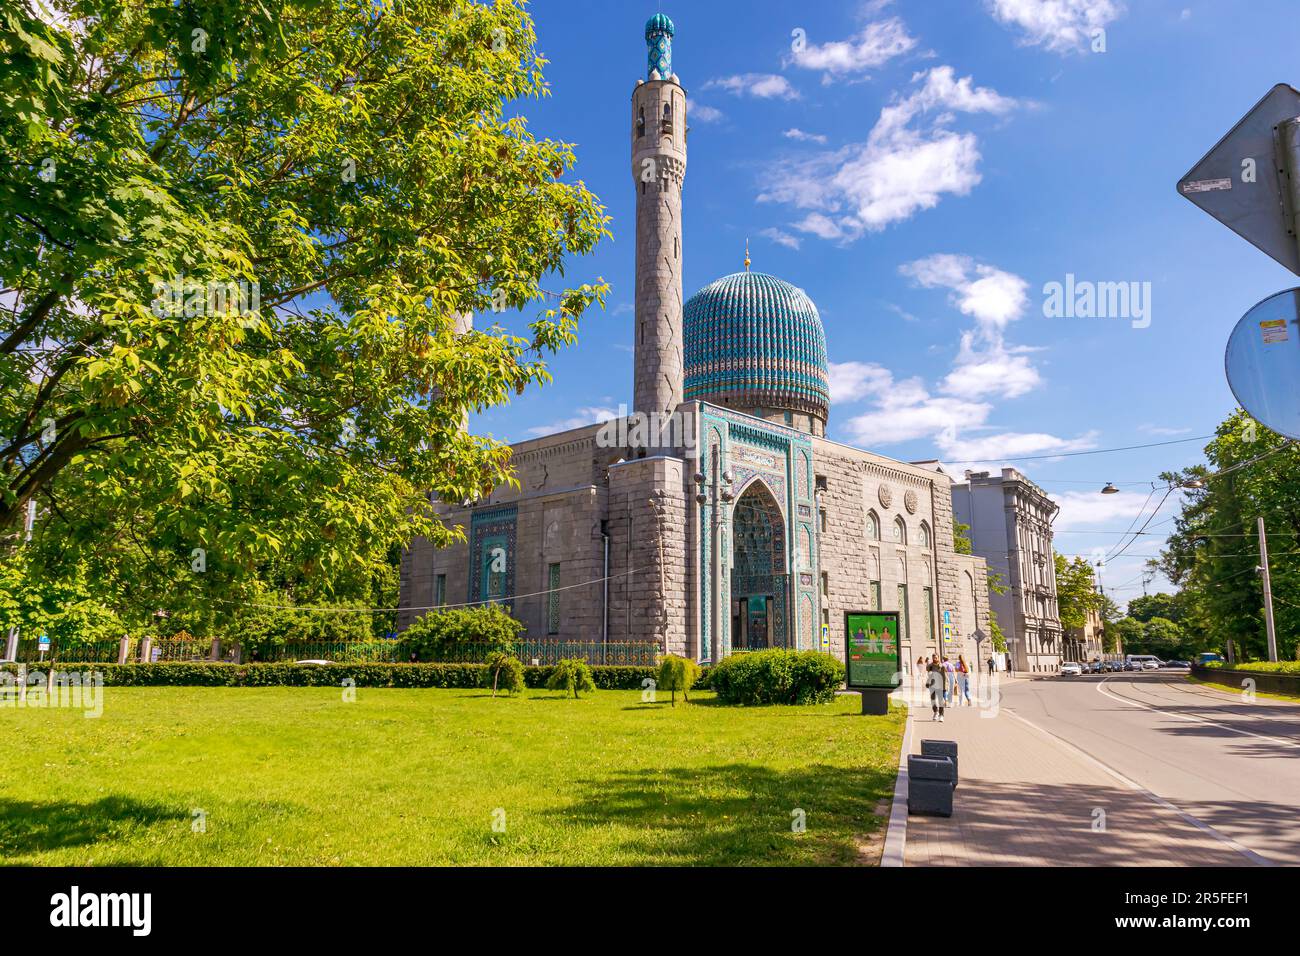 The main mosque in St. Petersburg on a sunny day. St. Petersburg, Russia - June 2, 2021. Stock Photo